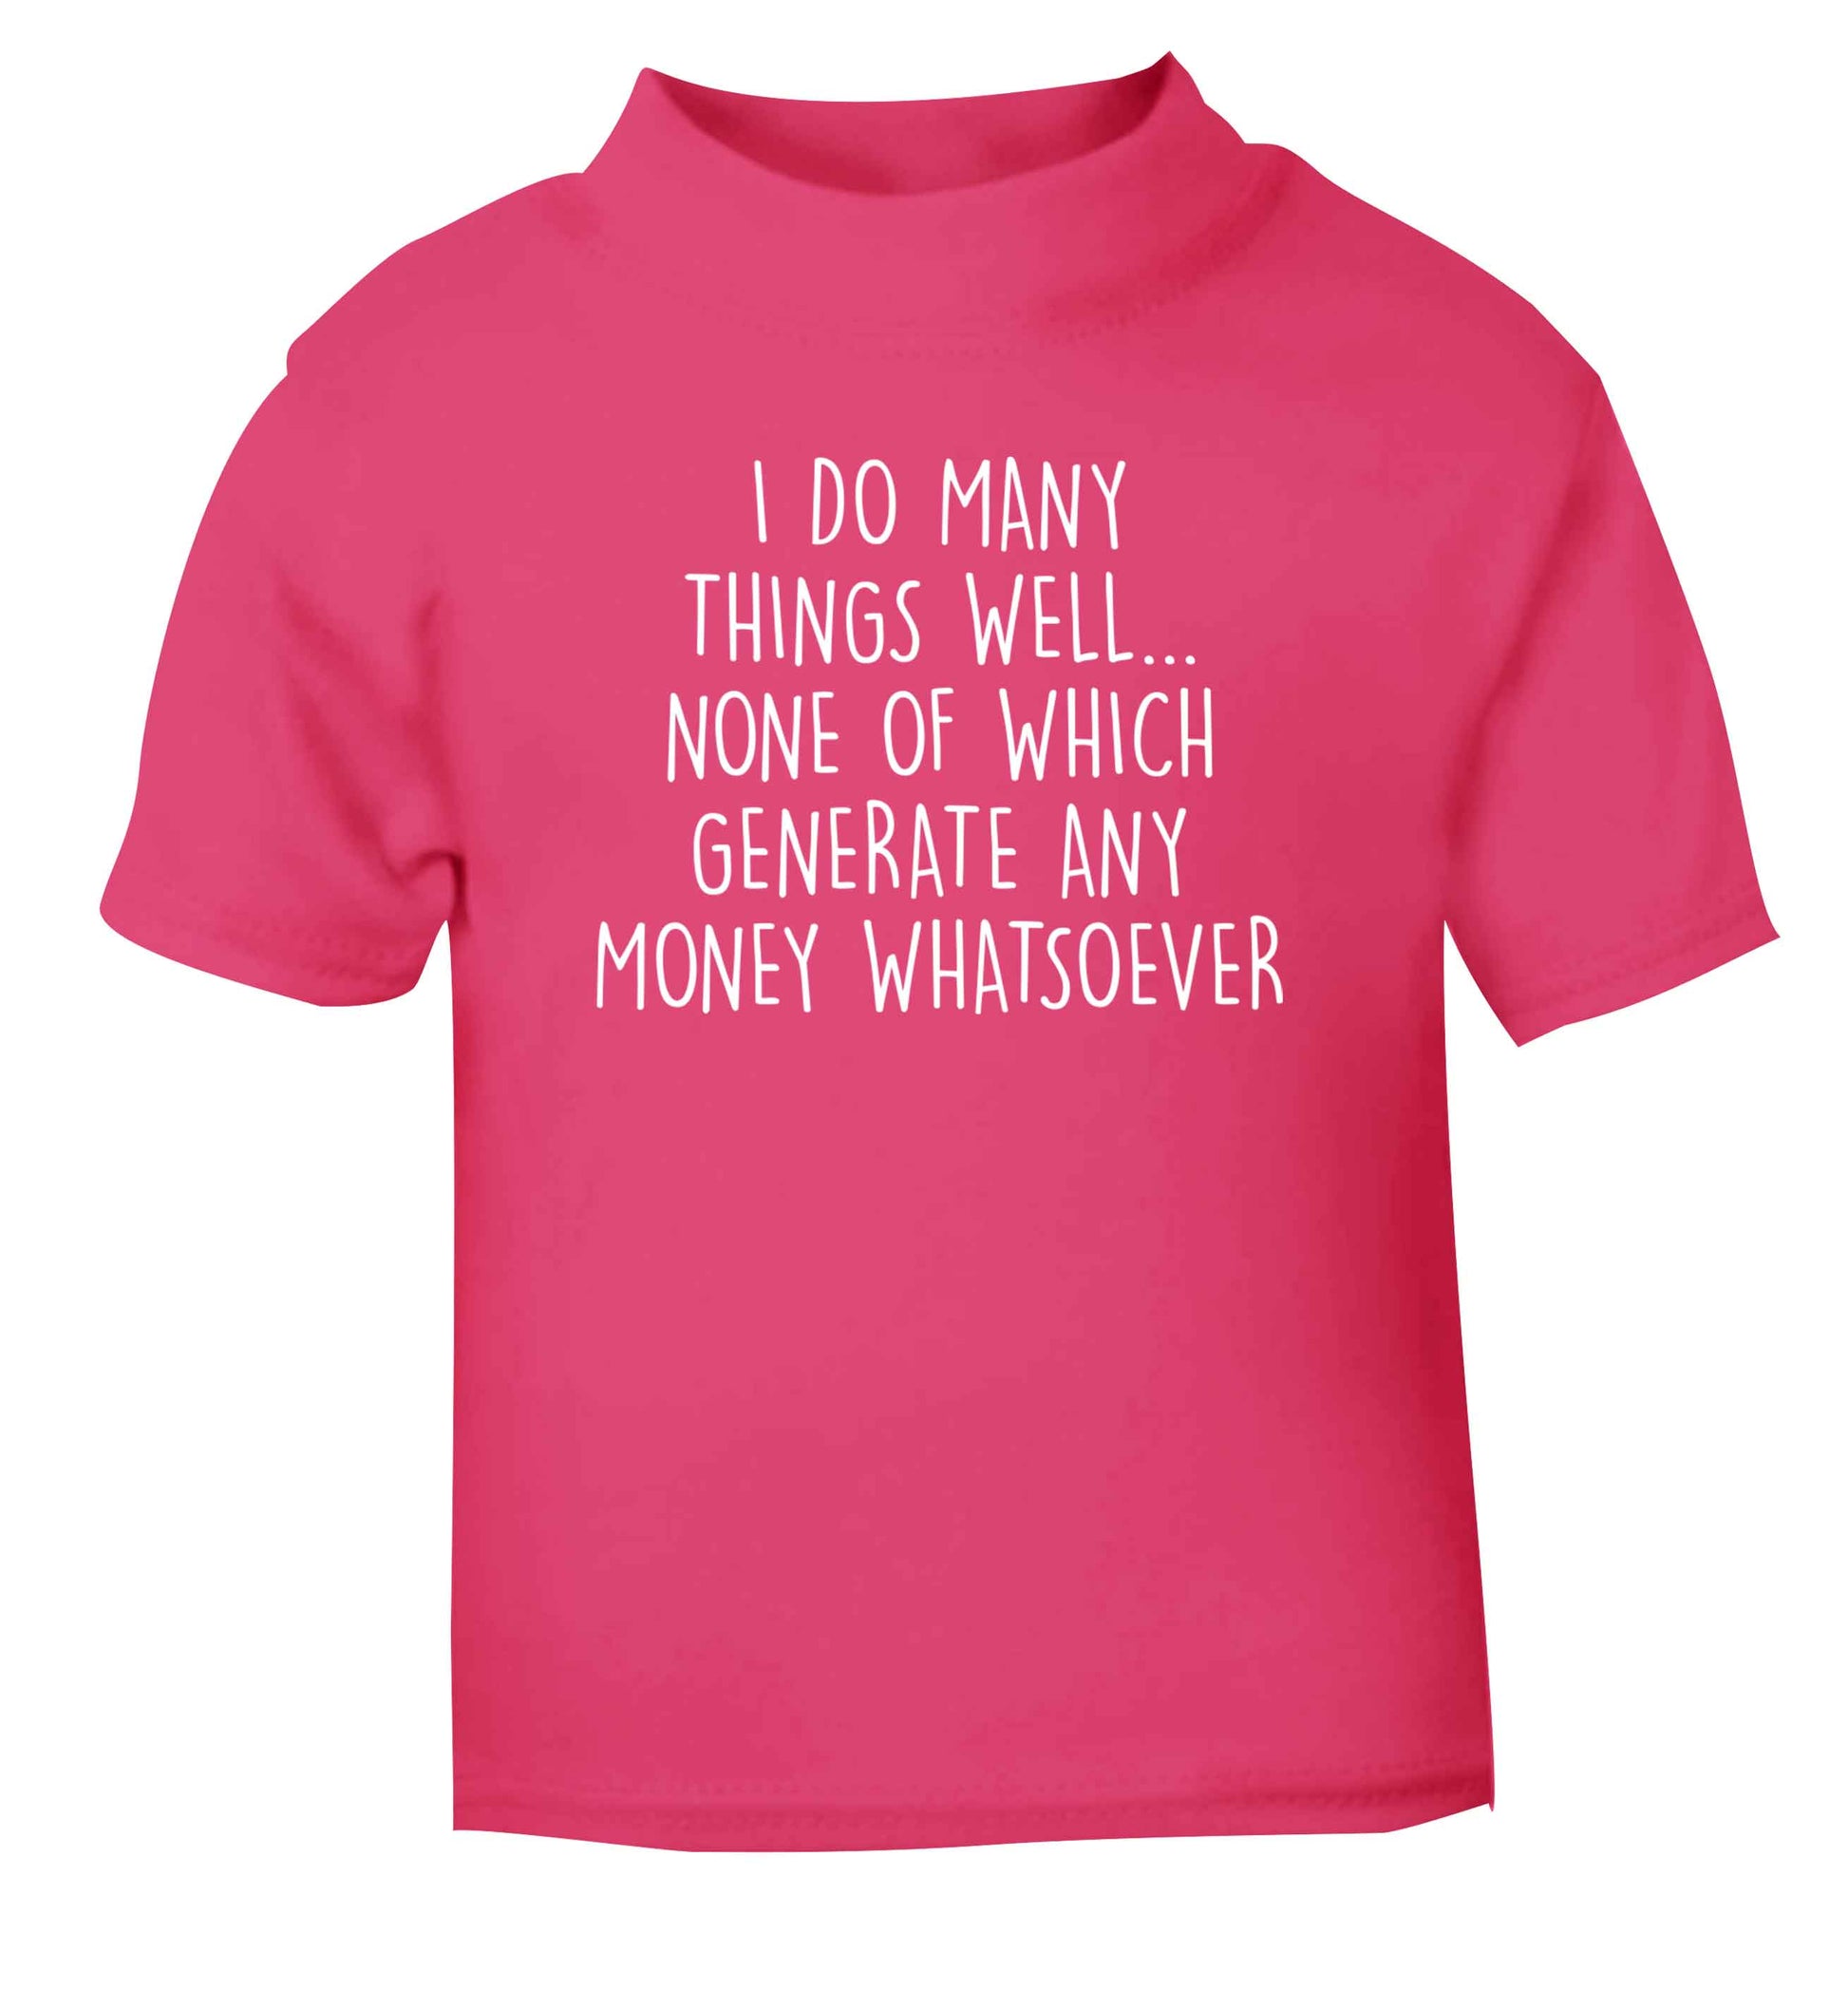 I do many things well none of which generate income pink Baby Toddler Tshirt 2 Years